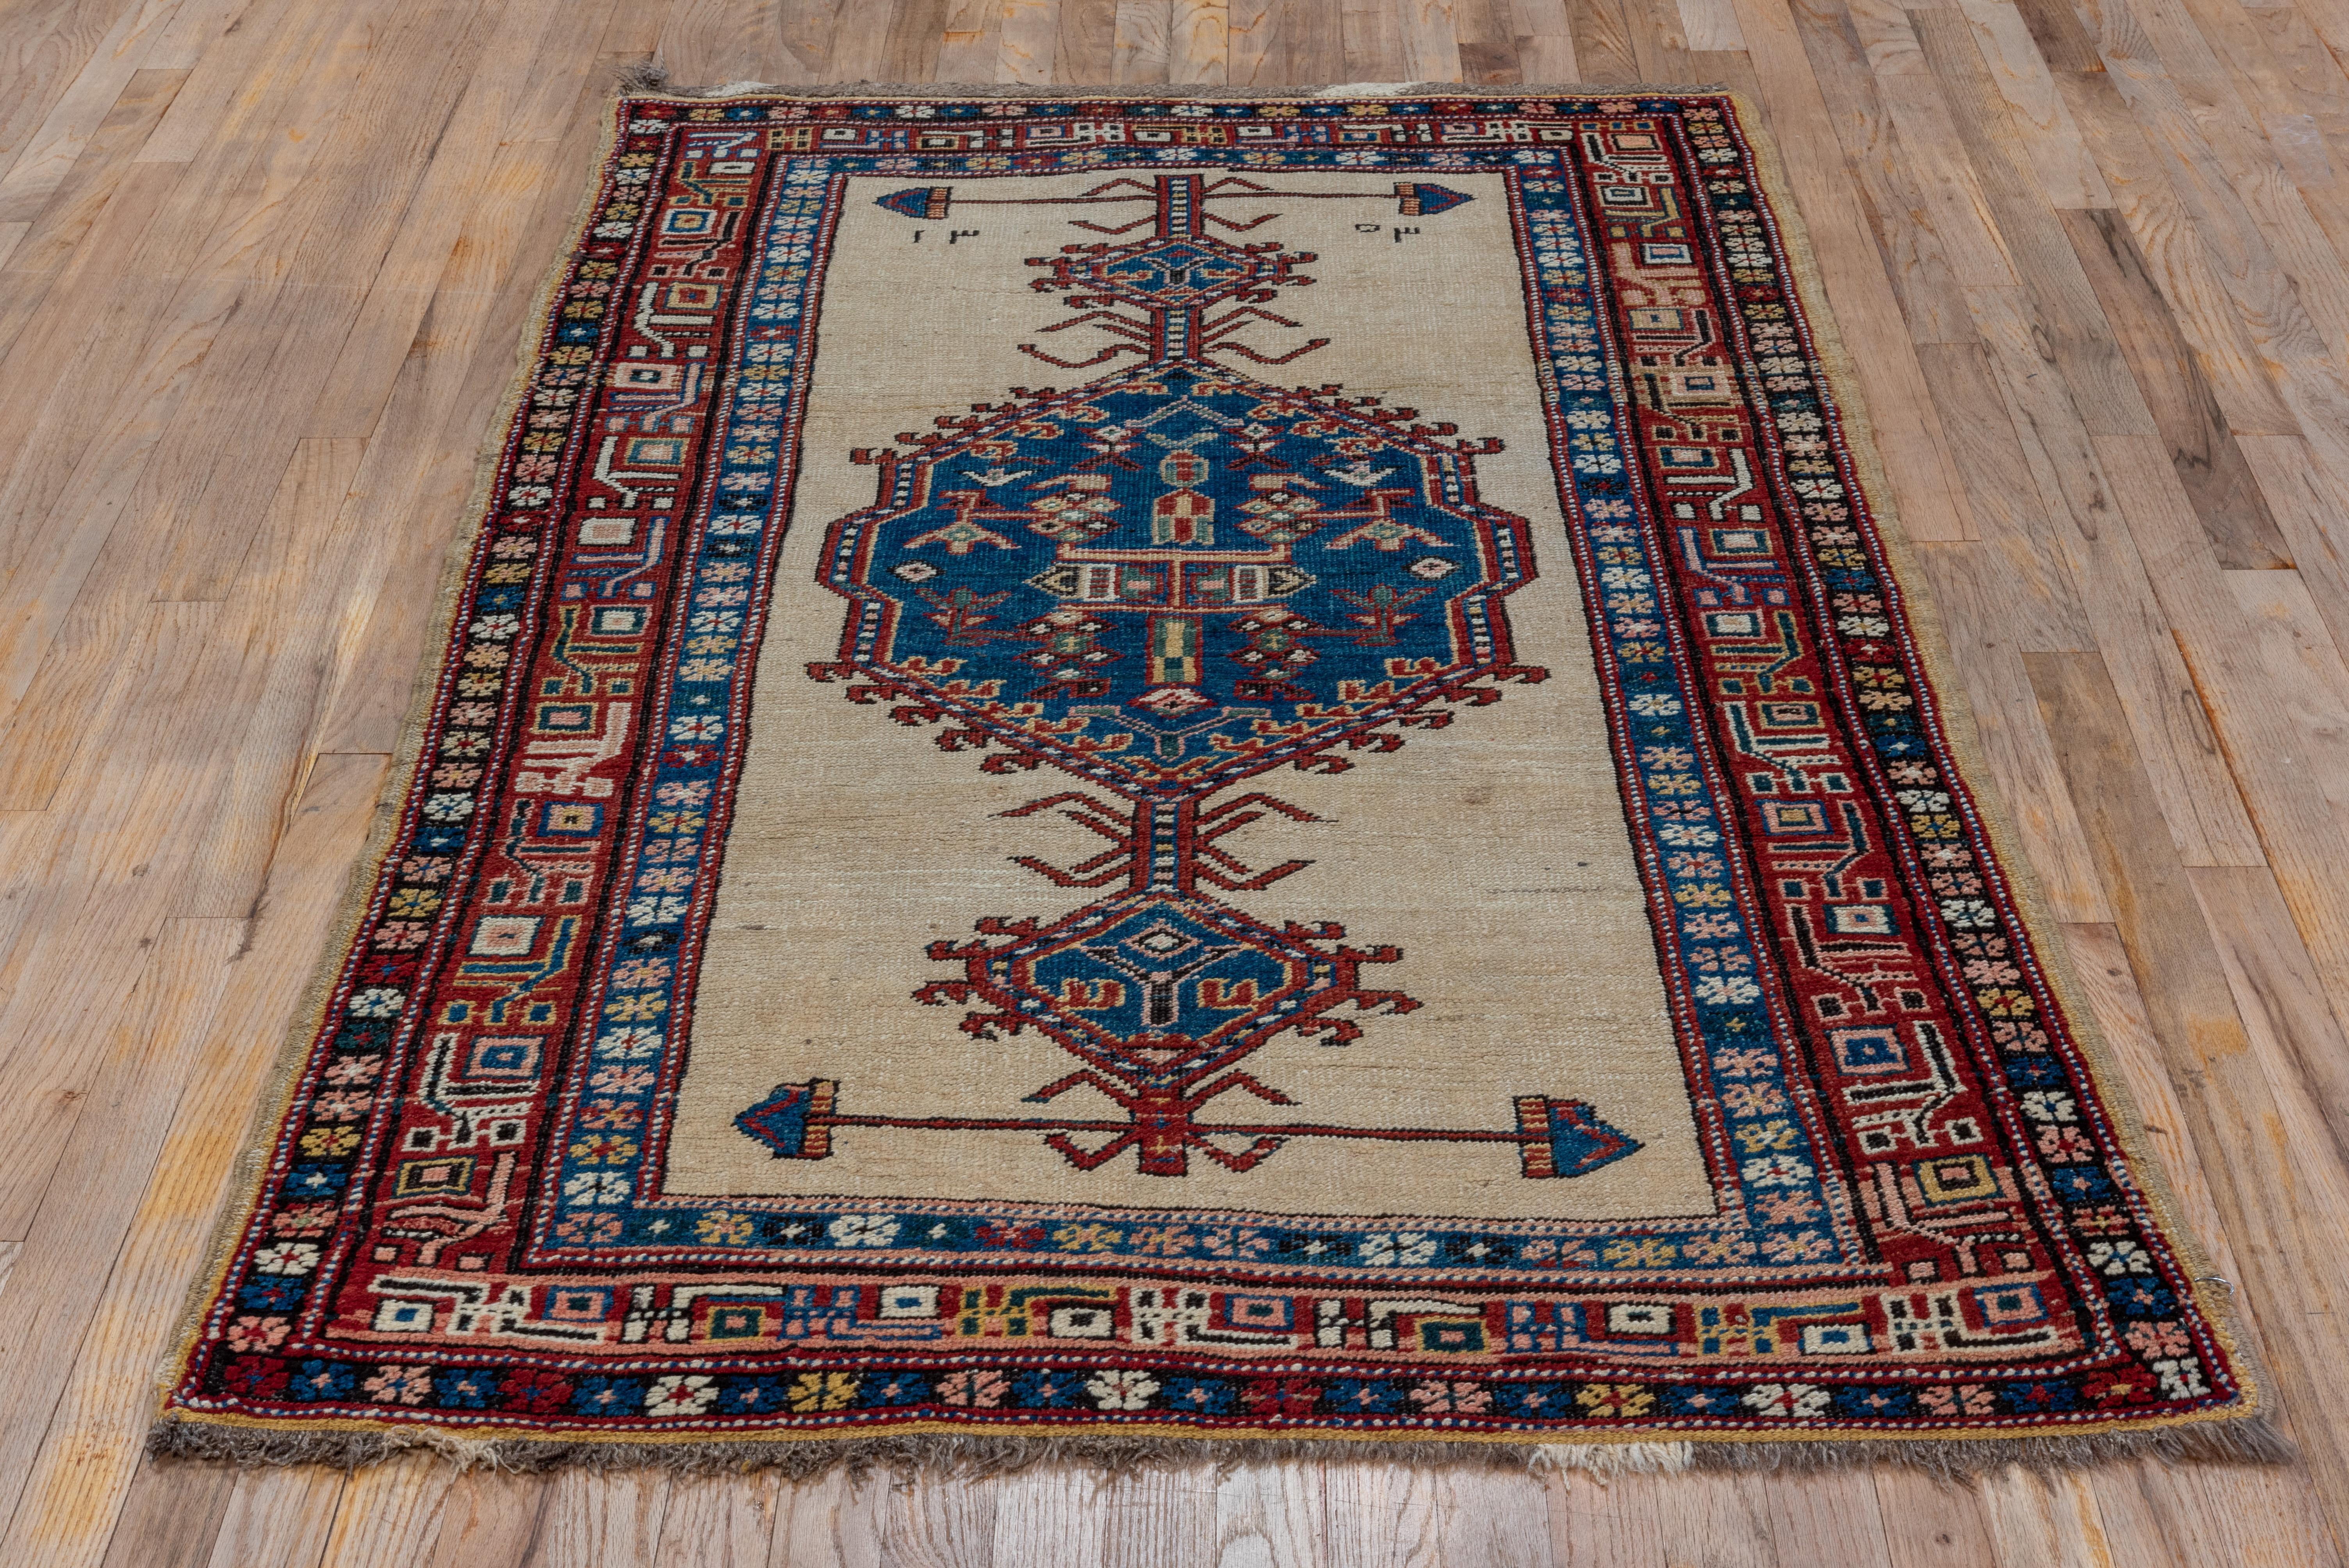 Rare in this dozar rug format, this NW Persian rustic scatter shows an ecru open field with on large, characteristic Serab medallion in blue, with pendants ending in double arrow horizontal finials. Narrow main red border of highly geometric